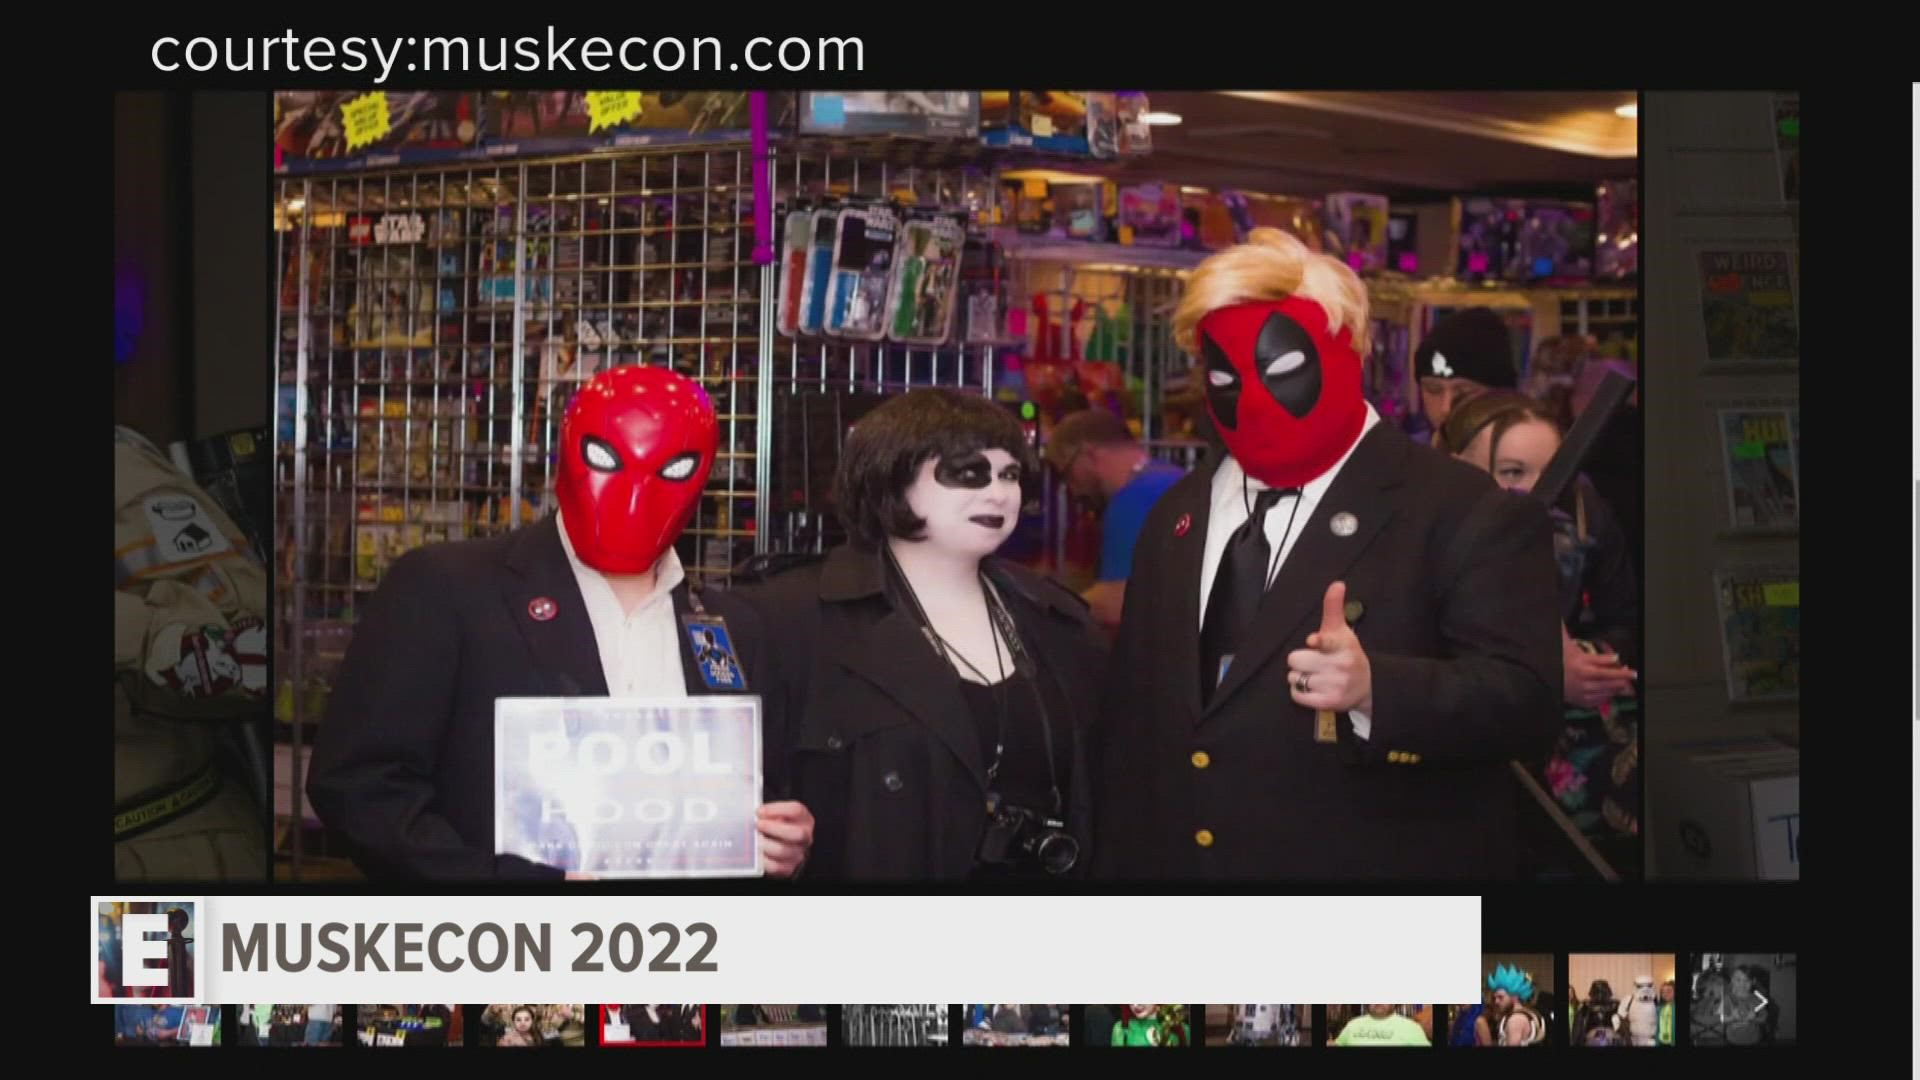 COVID-19 prompted the local comic convention, called MuskeCon, to cancel in 2020 and 2021. Now, it's back and better than ever.